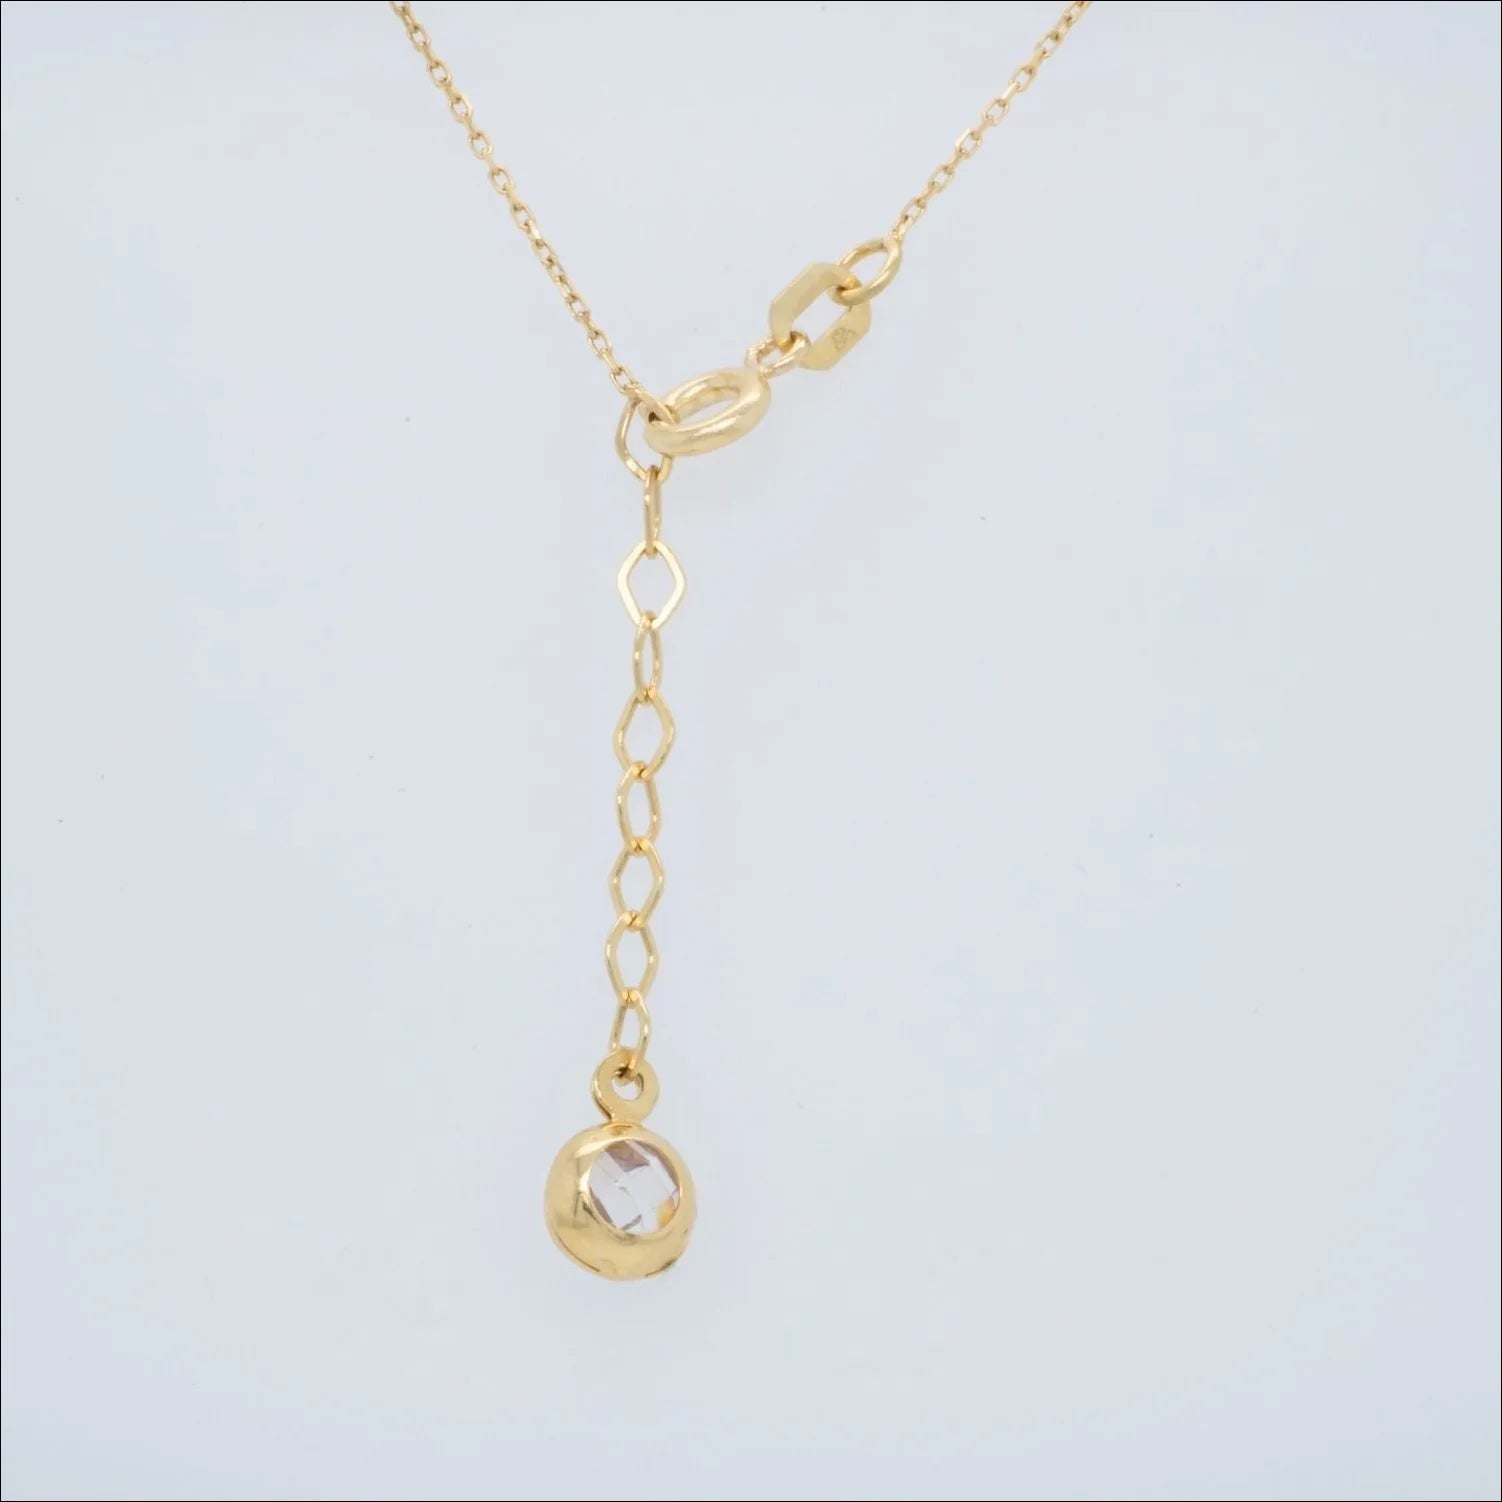 Art Gold Jewelry 18k Charms Anklet | Home page